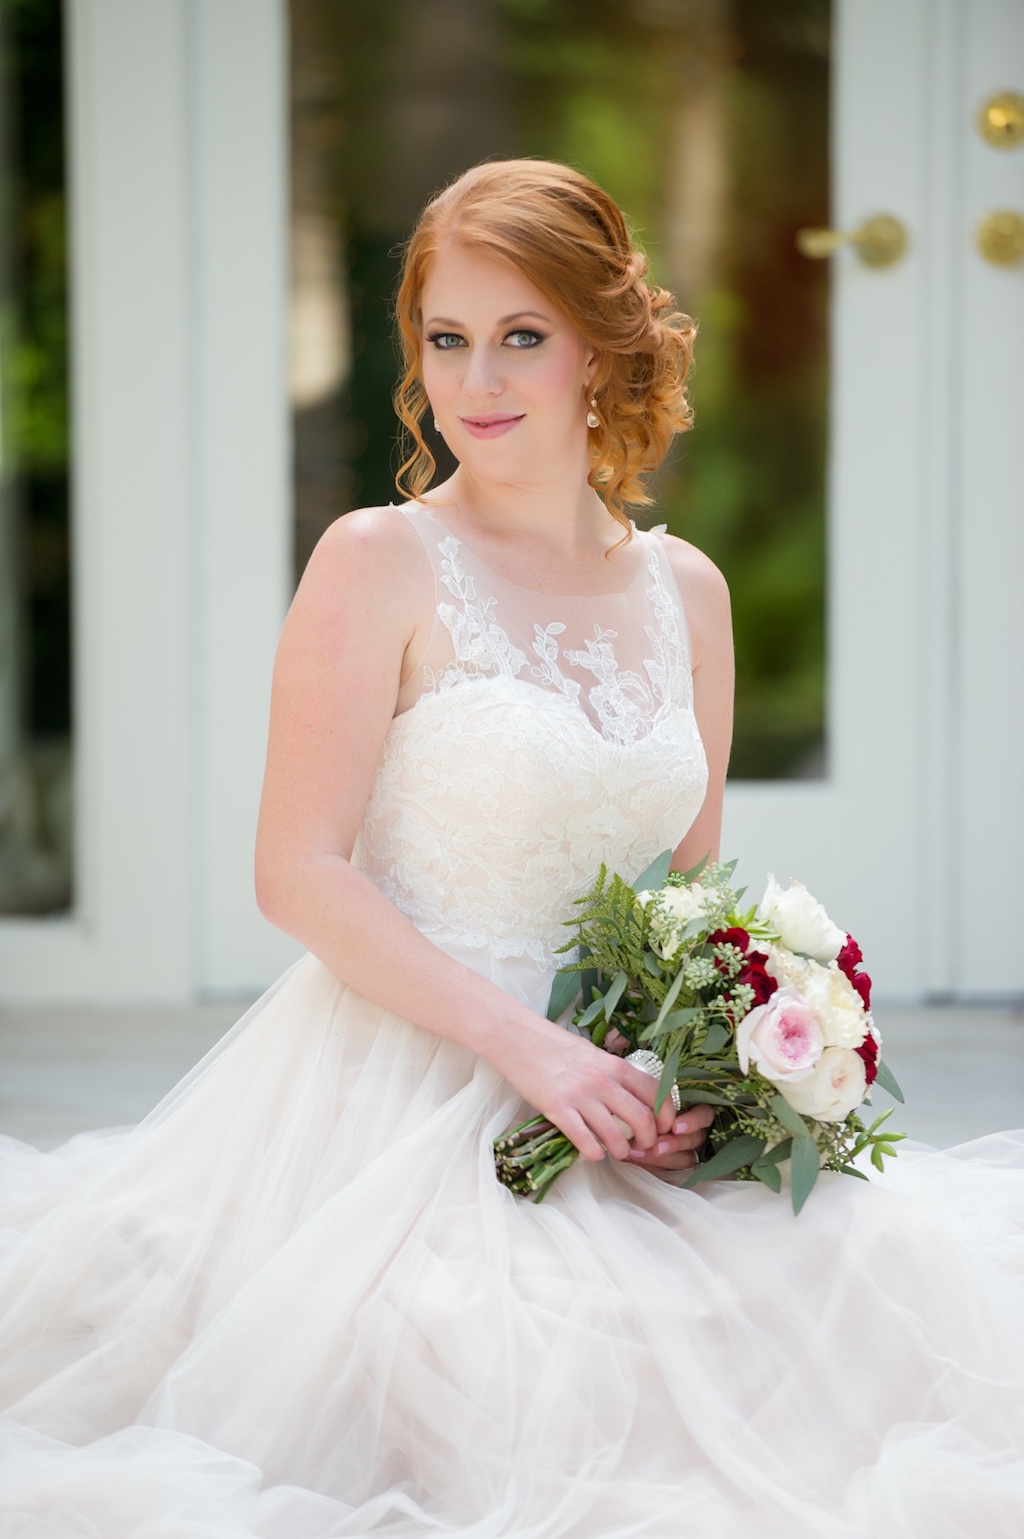 Outdoor Garden Bridal Portrait in Lace Princess Blush Wedding Dress with White, Pink, and Red Rose Bouquet with Greenery | Tampa Bay Wedding Photographer Andi Diamond Photography | Hair and Makeup Michele Renee The Studio